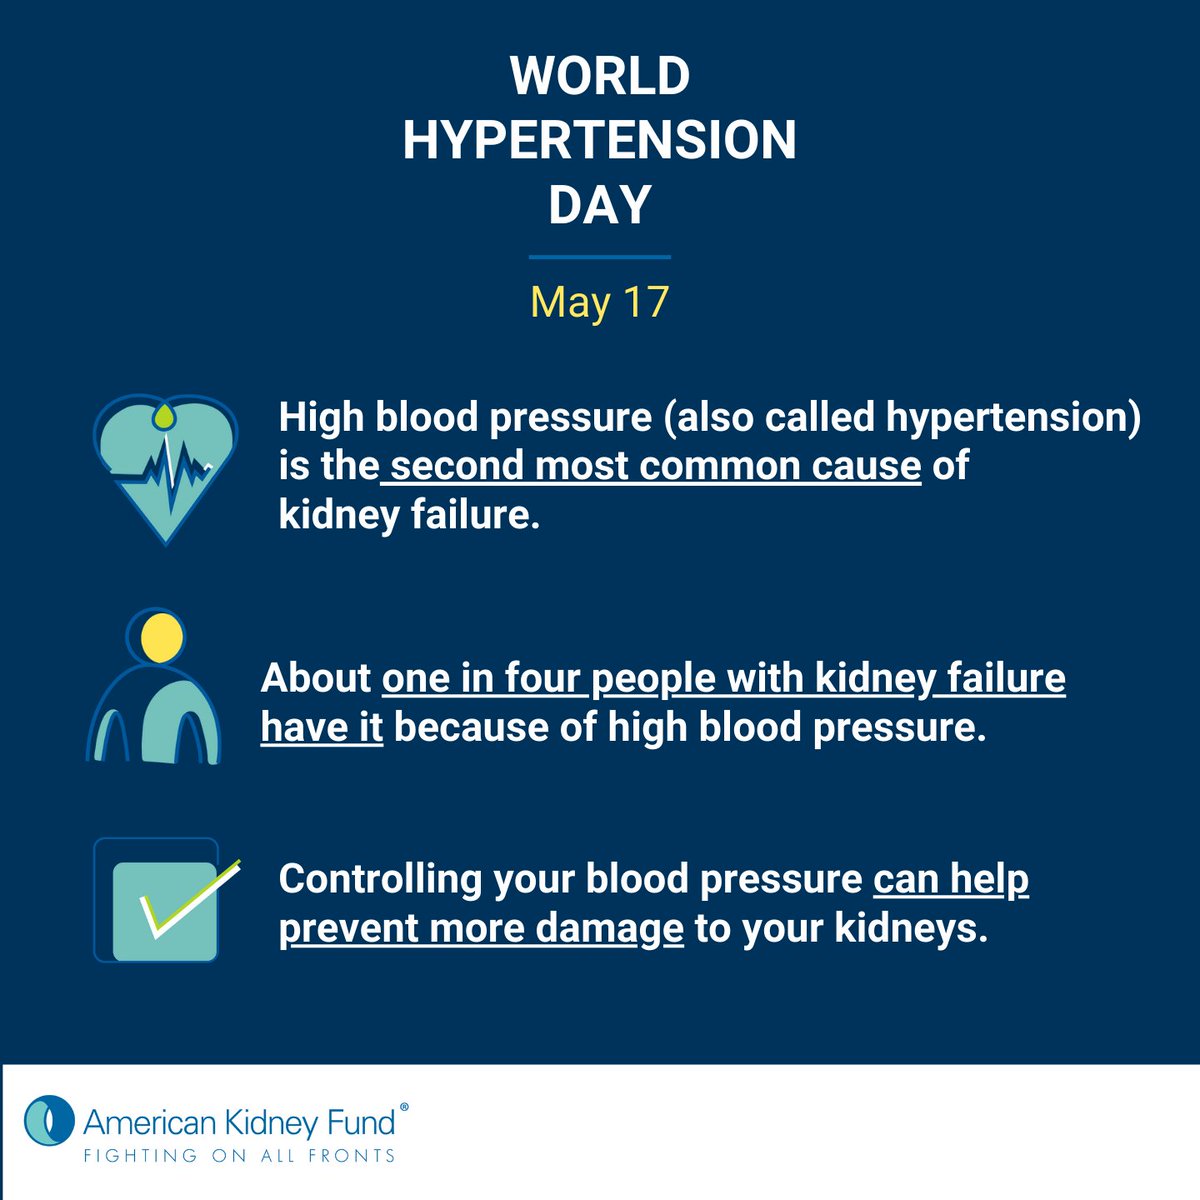 Today is #WorldHypertensionDay. Did you know that #hypertension, also called #highbloodpressure, is the second most common cause of #kidneyfailure? In time, high blood pressure can damage your blood vessels, which can lead to #kidneyfailure. Learn more: bit.ly/39xRcit